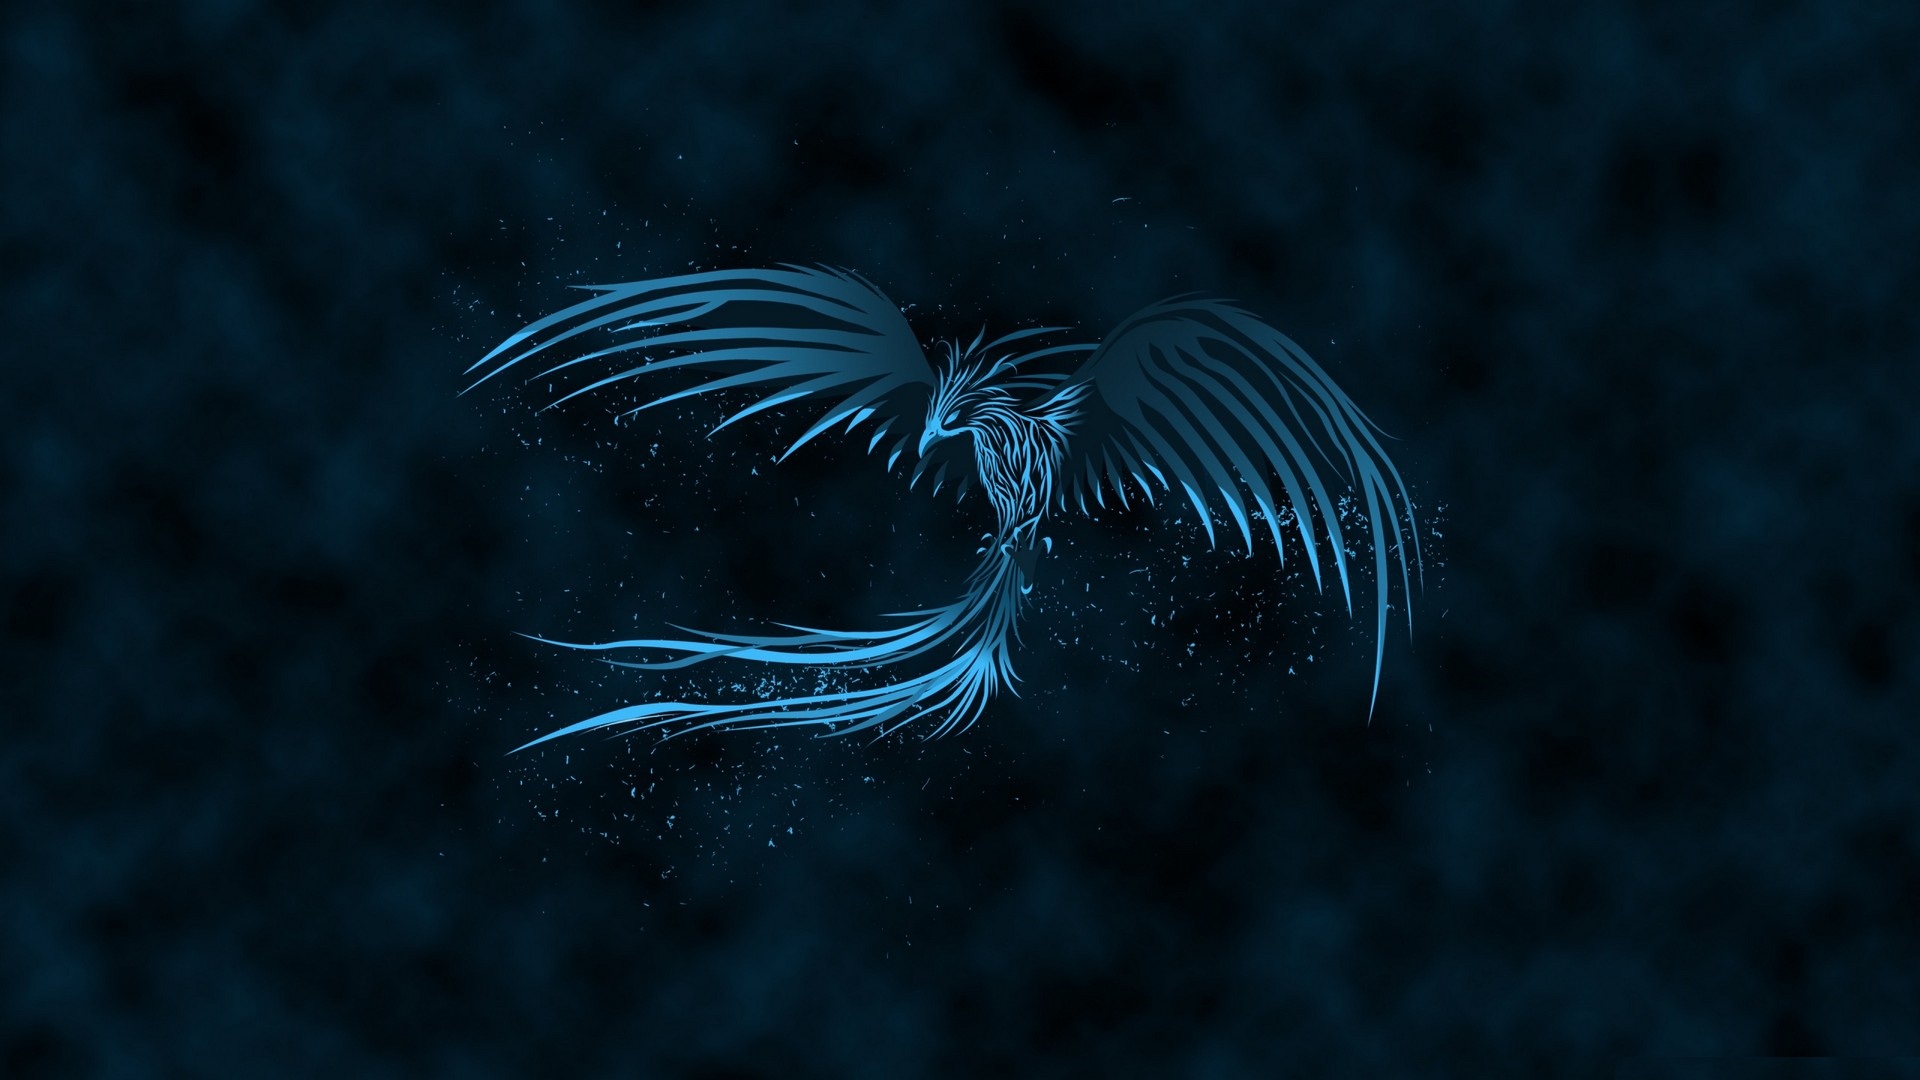 Ice Phoenix Desktop Backgrounds With Resolution 1920X1080 pixel. You can make this wallpaper for your Desktop Computer Backgrounds, Mac Wallpapers, Android Lock screen or iPhone Screensavers